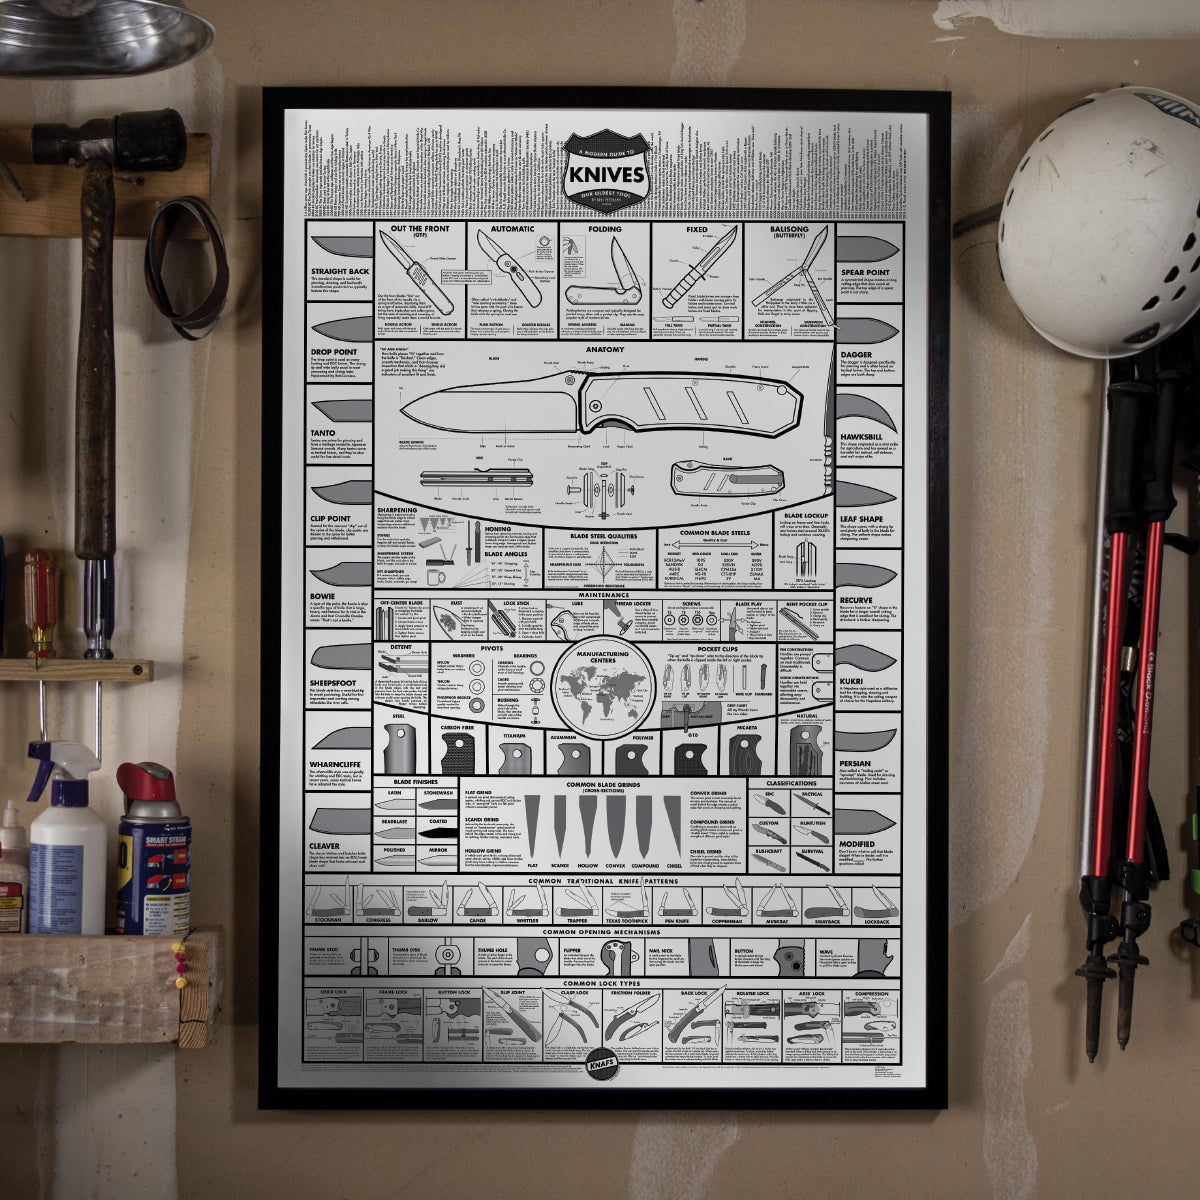 White Knife Poster - A Modern Guide to Knives - 24x36"